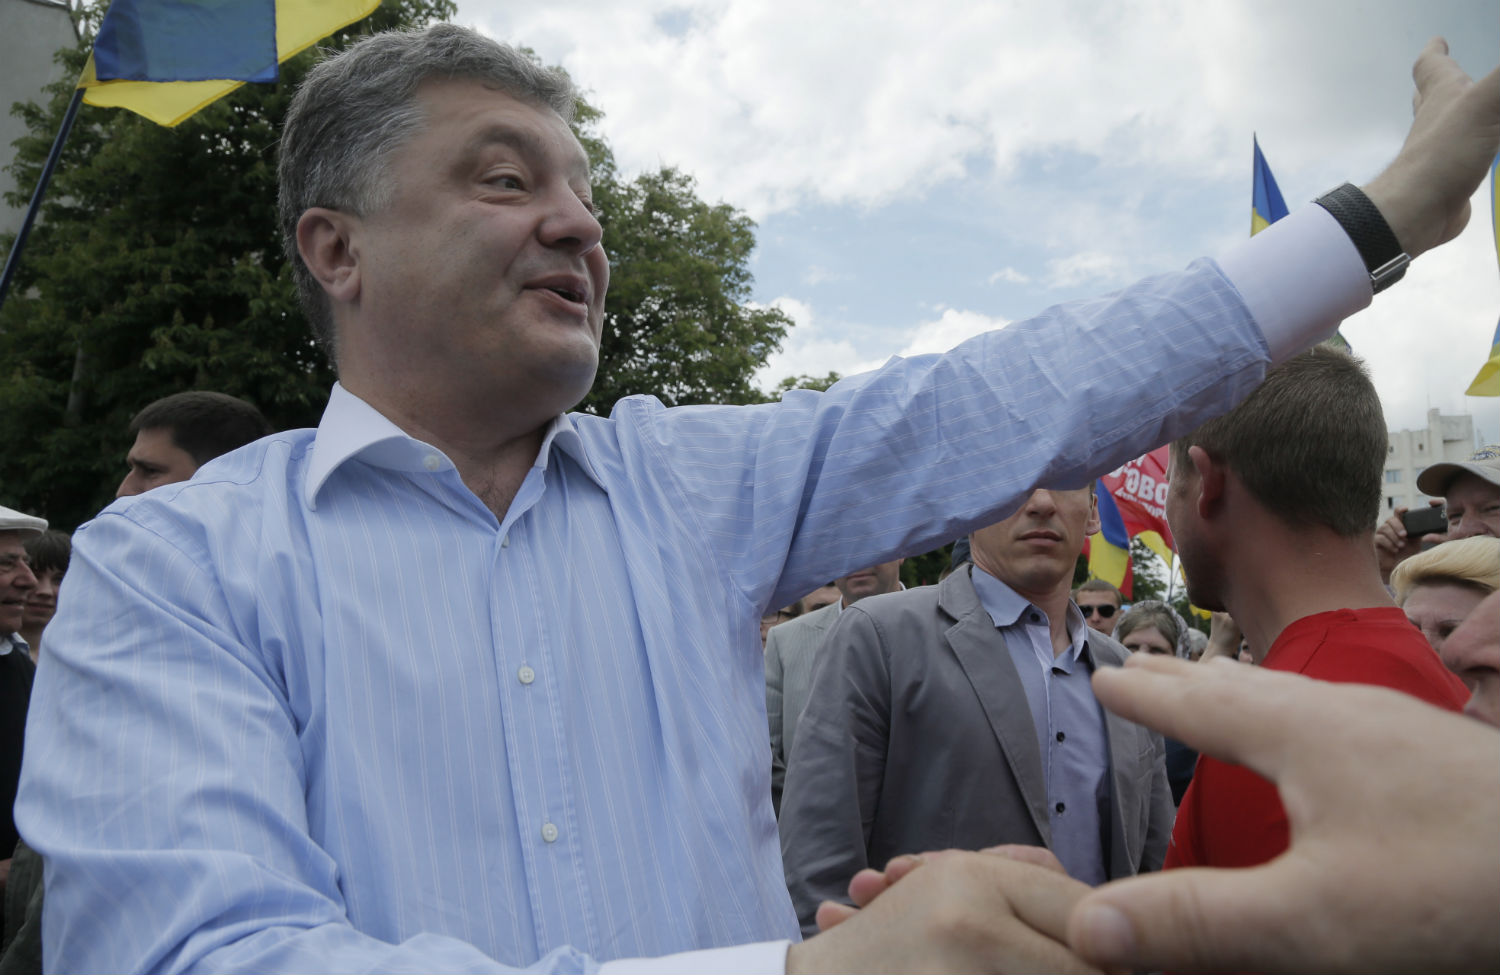 Ukraine Vote on Sunday Could Be Major Step Toward Ending the Crisis